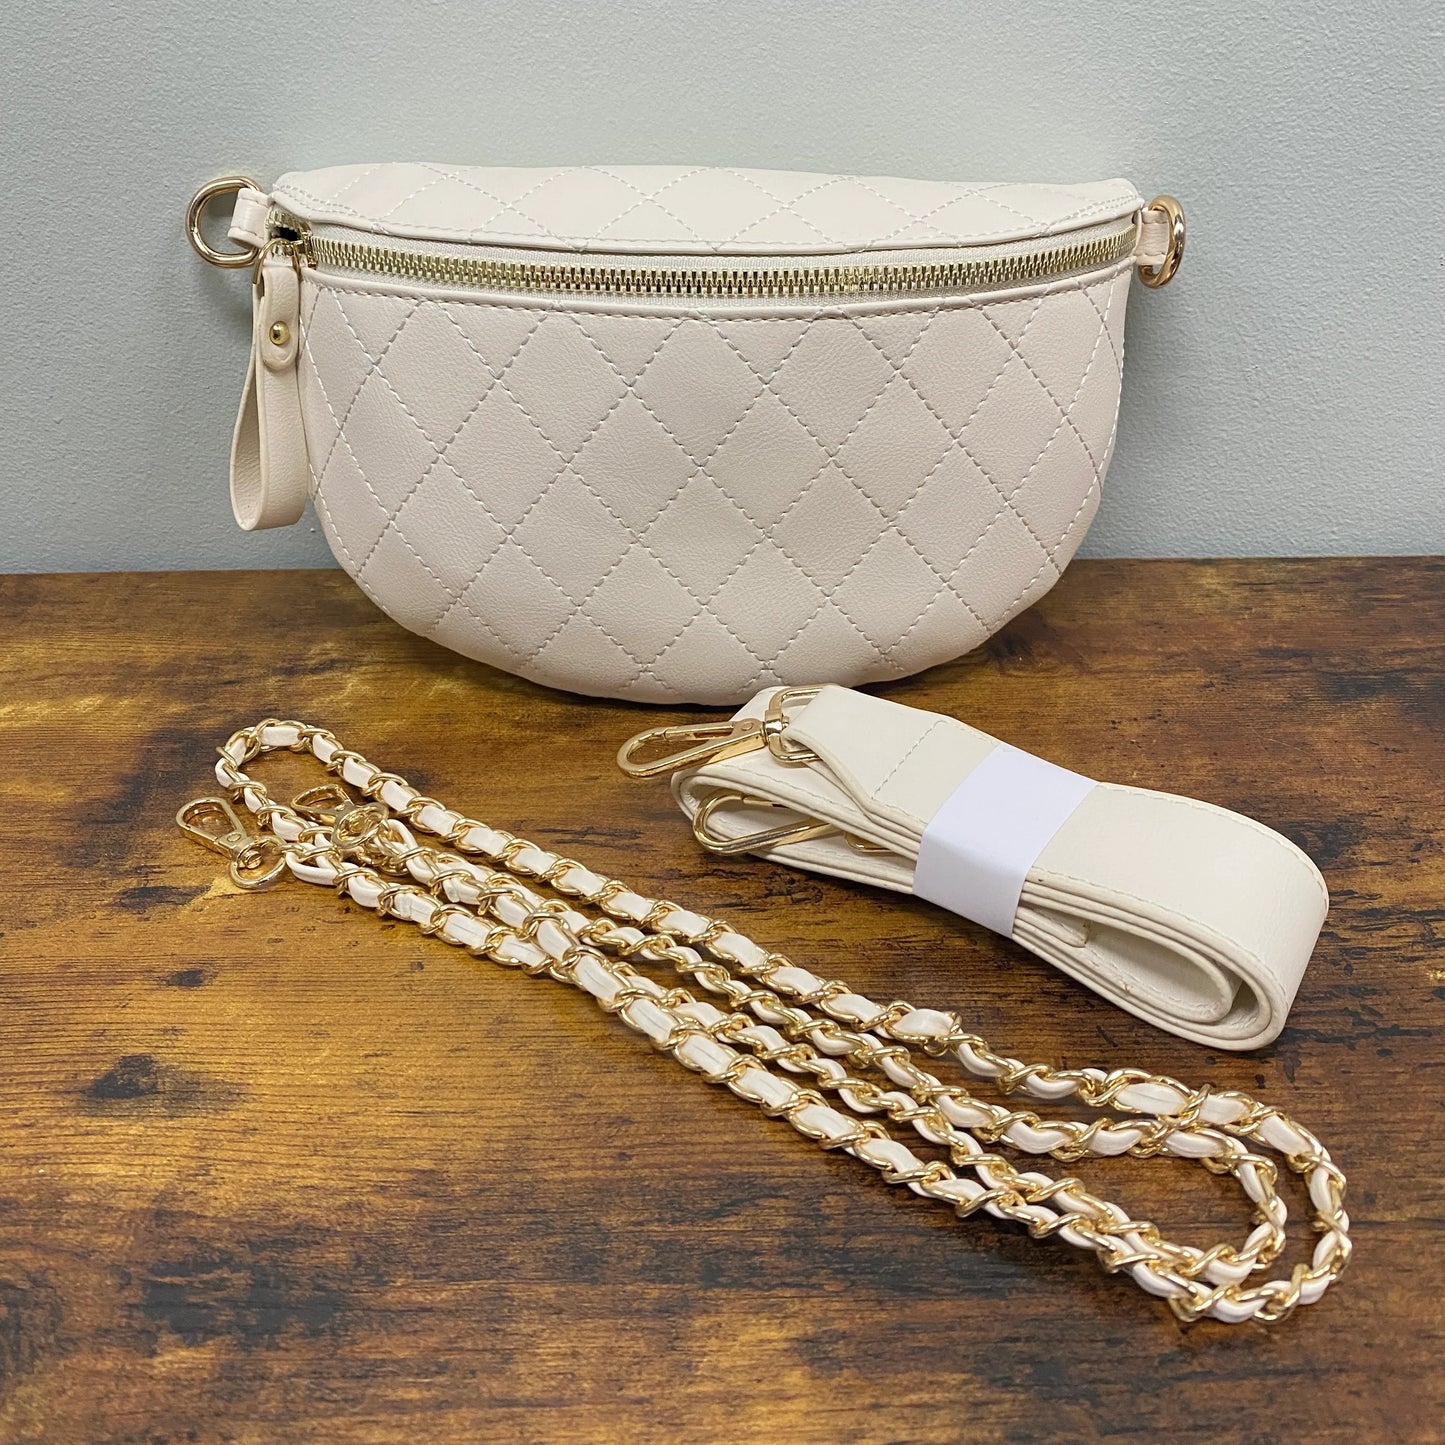 The Fanny Sling Crossbody - Quilted Faux Leather